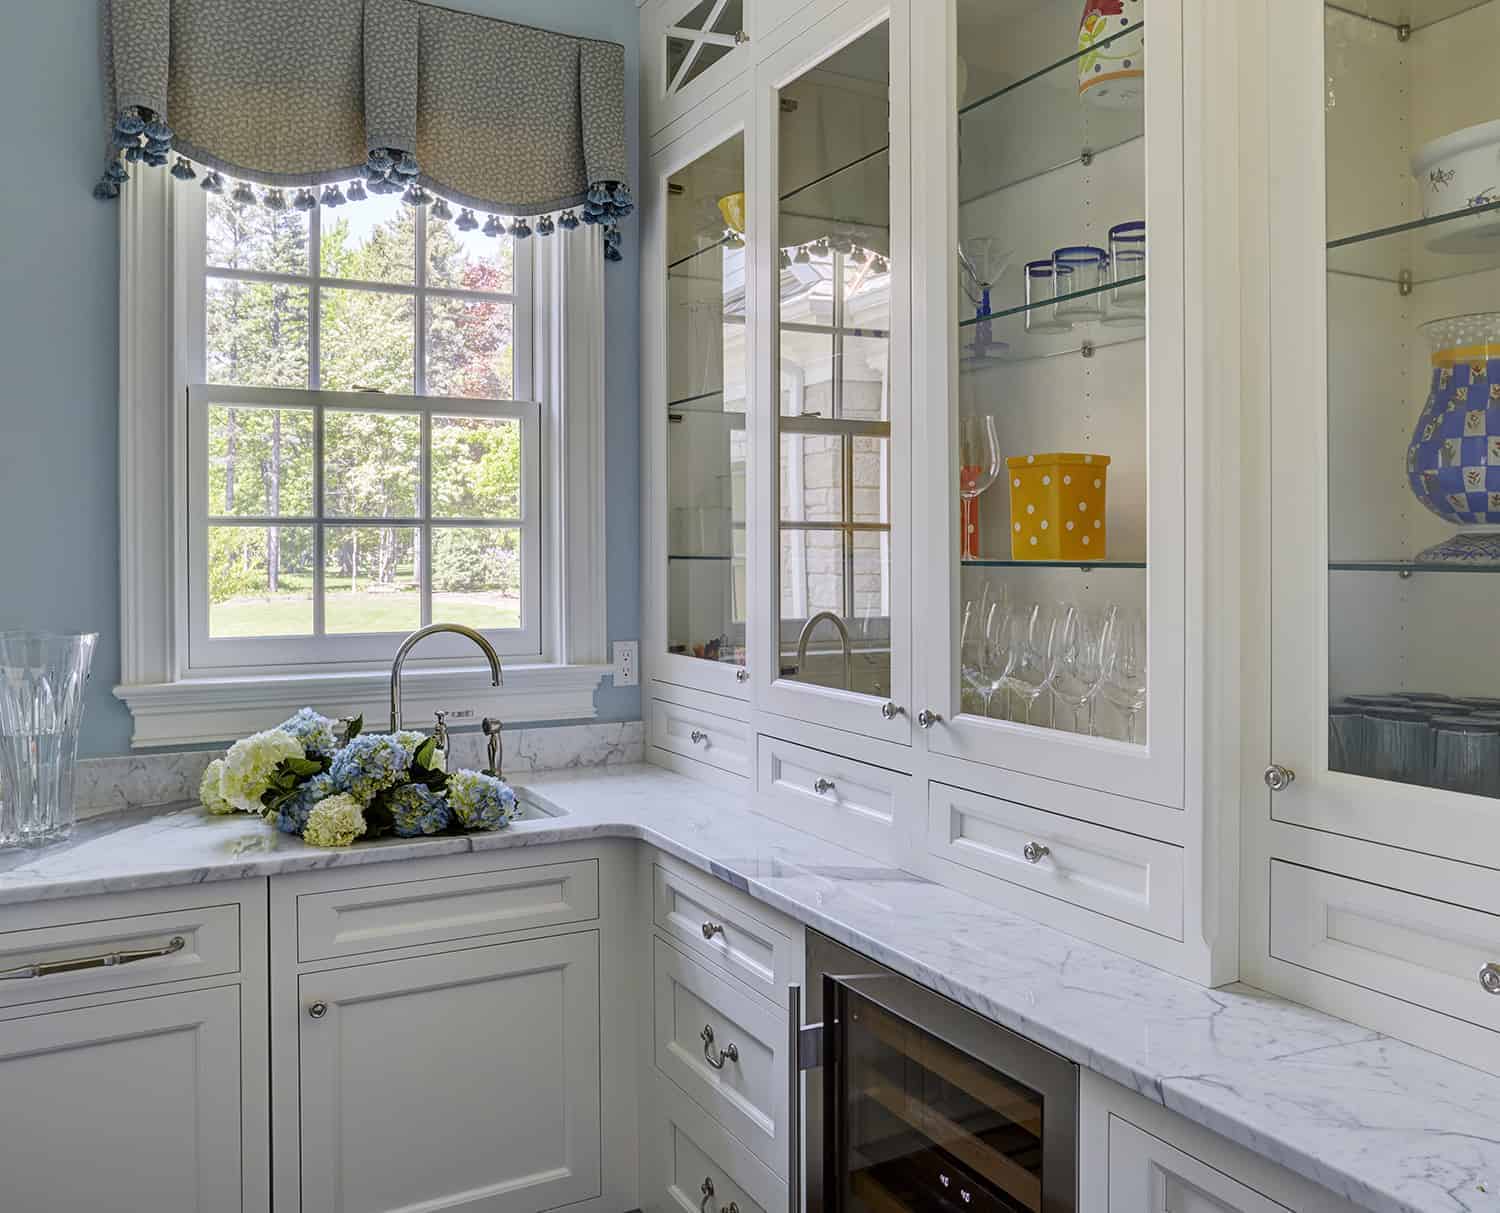 https://www.pickellbuilders.com/wp-content/uploads/2022/02/buters-pantry-glass-front-cabinets.jpg